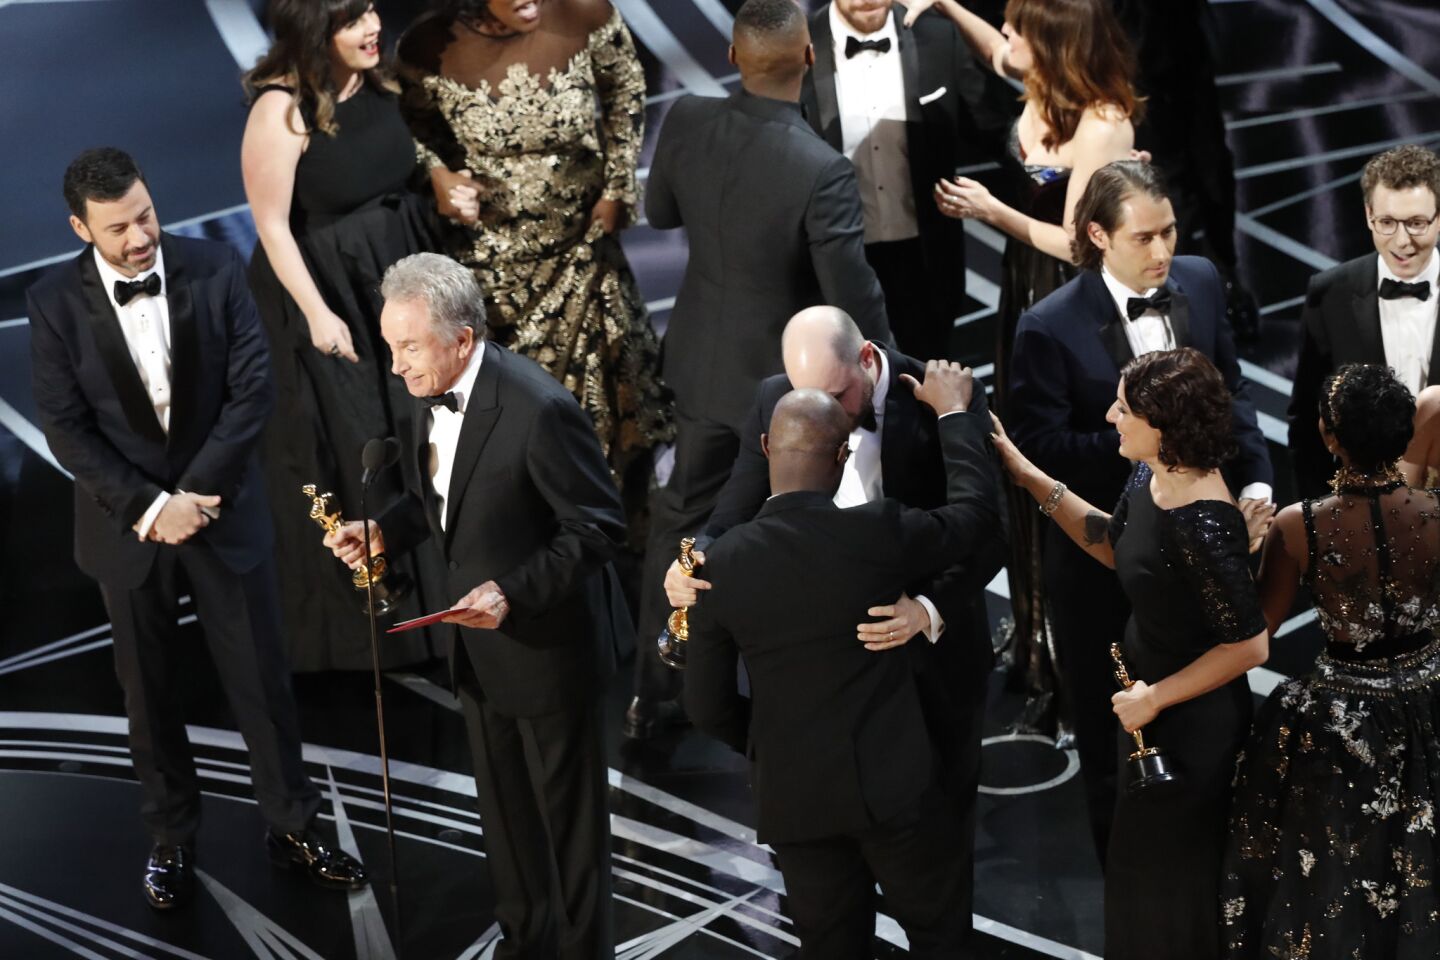 Presenter Warren Beatty and host Jimmy Kimmel try to explain to the audience how the wrong envelope for best picture was read onstage during the Academy Awards telecast on Feb. 26. At right are "Moonlight" writer/director Barry Jenkins, left, and "La La Land" producer Jordan Horowitz embracing.